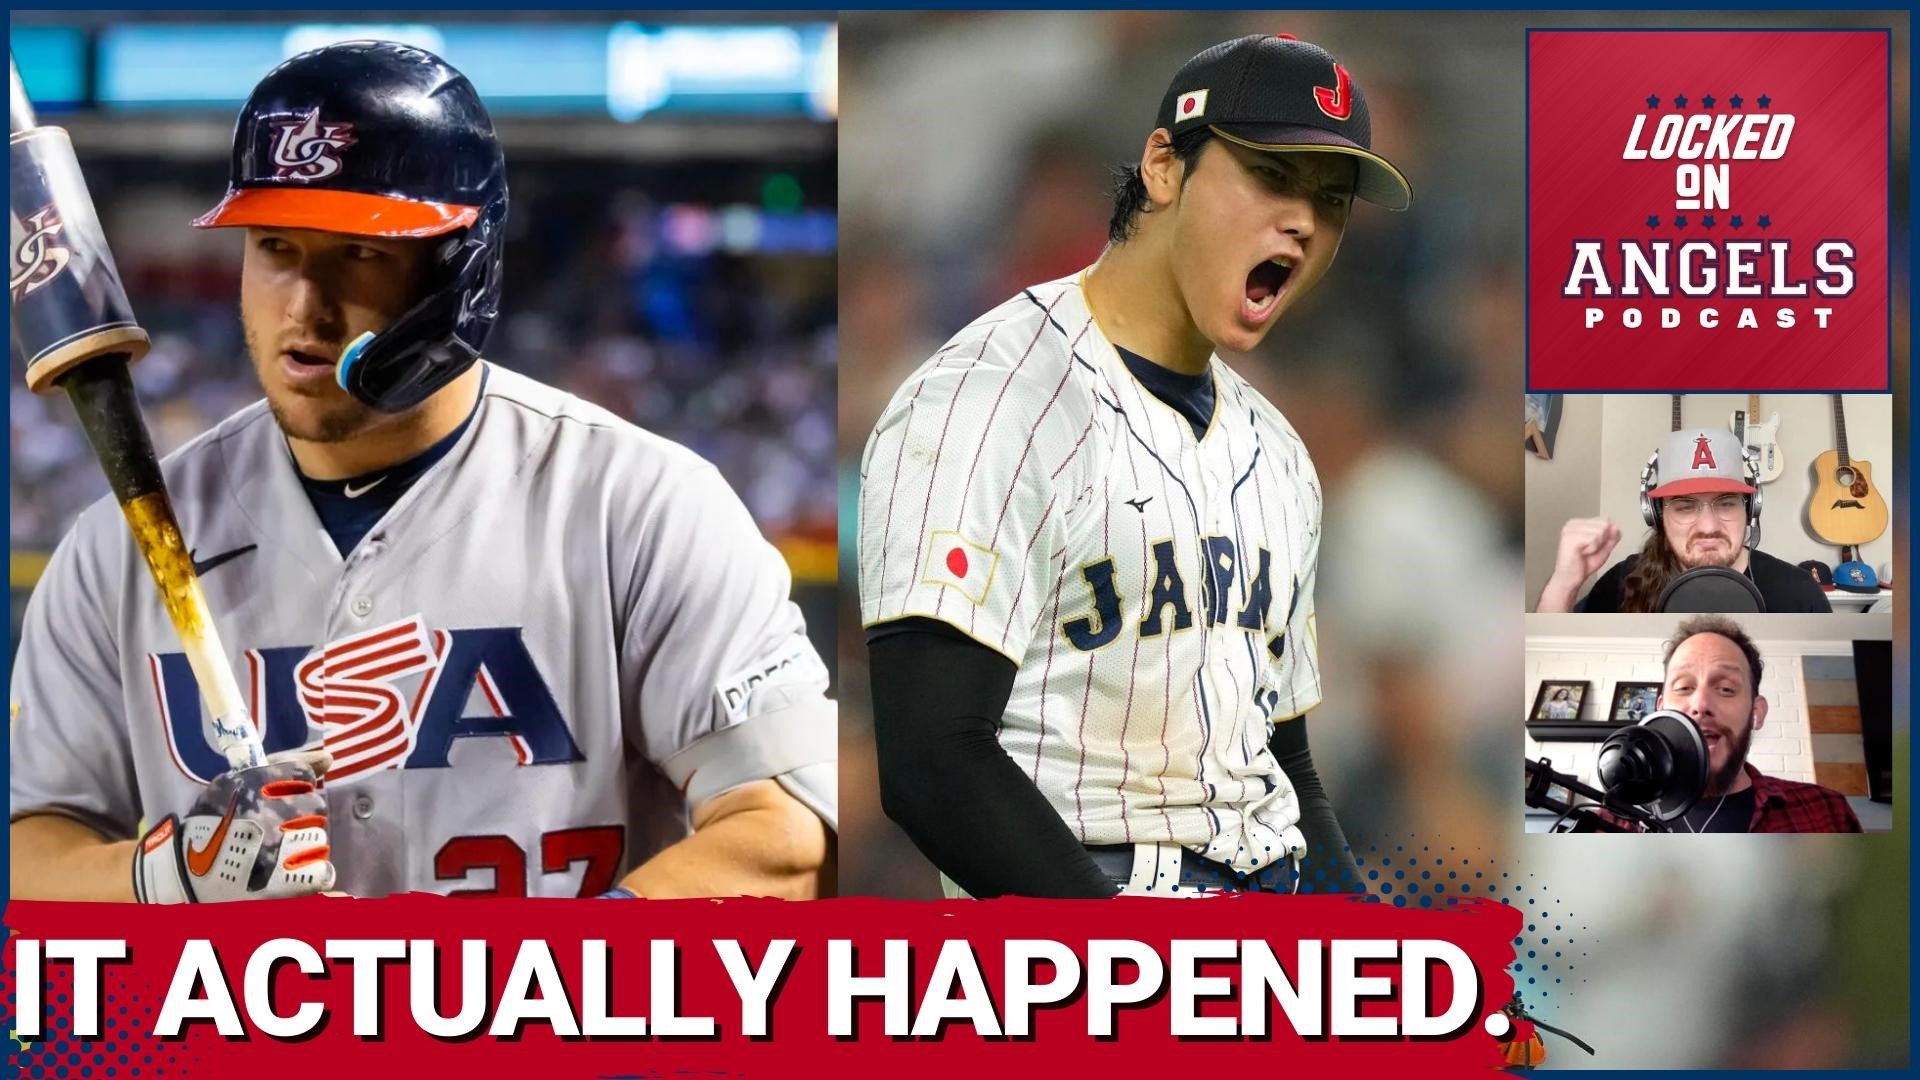 The WBC final lived up to the hype. It came down to Mike Trout vs. Shohei Ohtani at the end and it was quite a show.